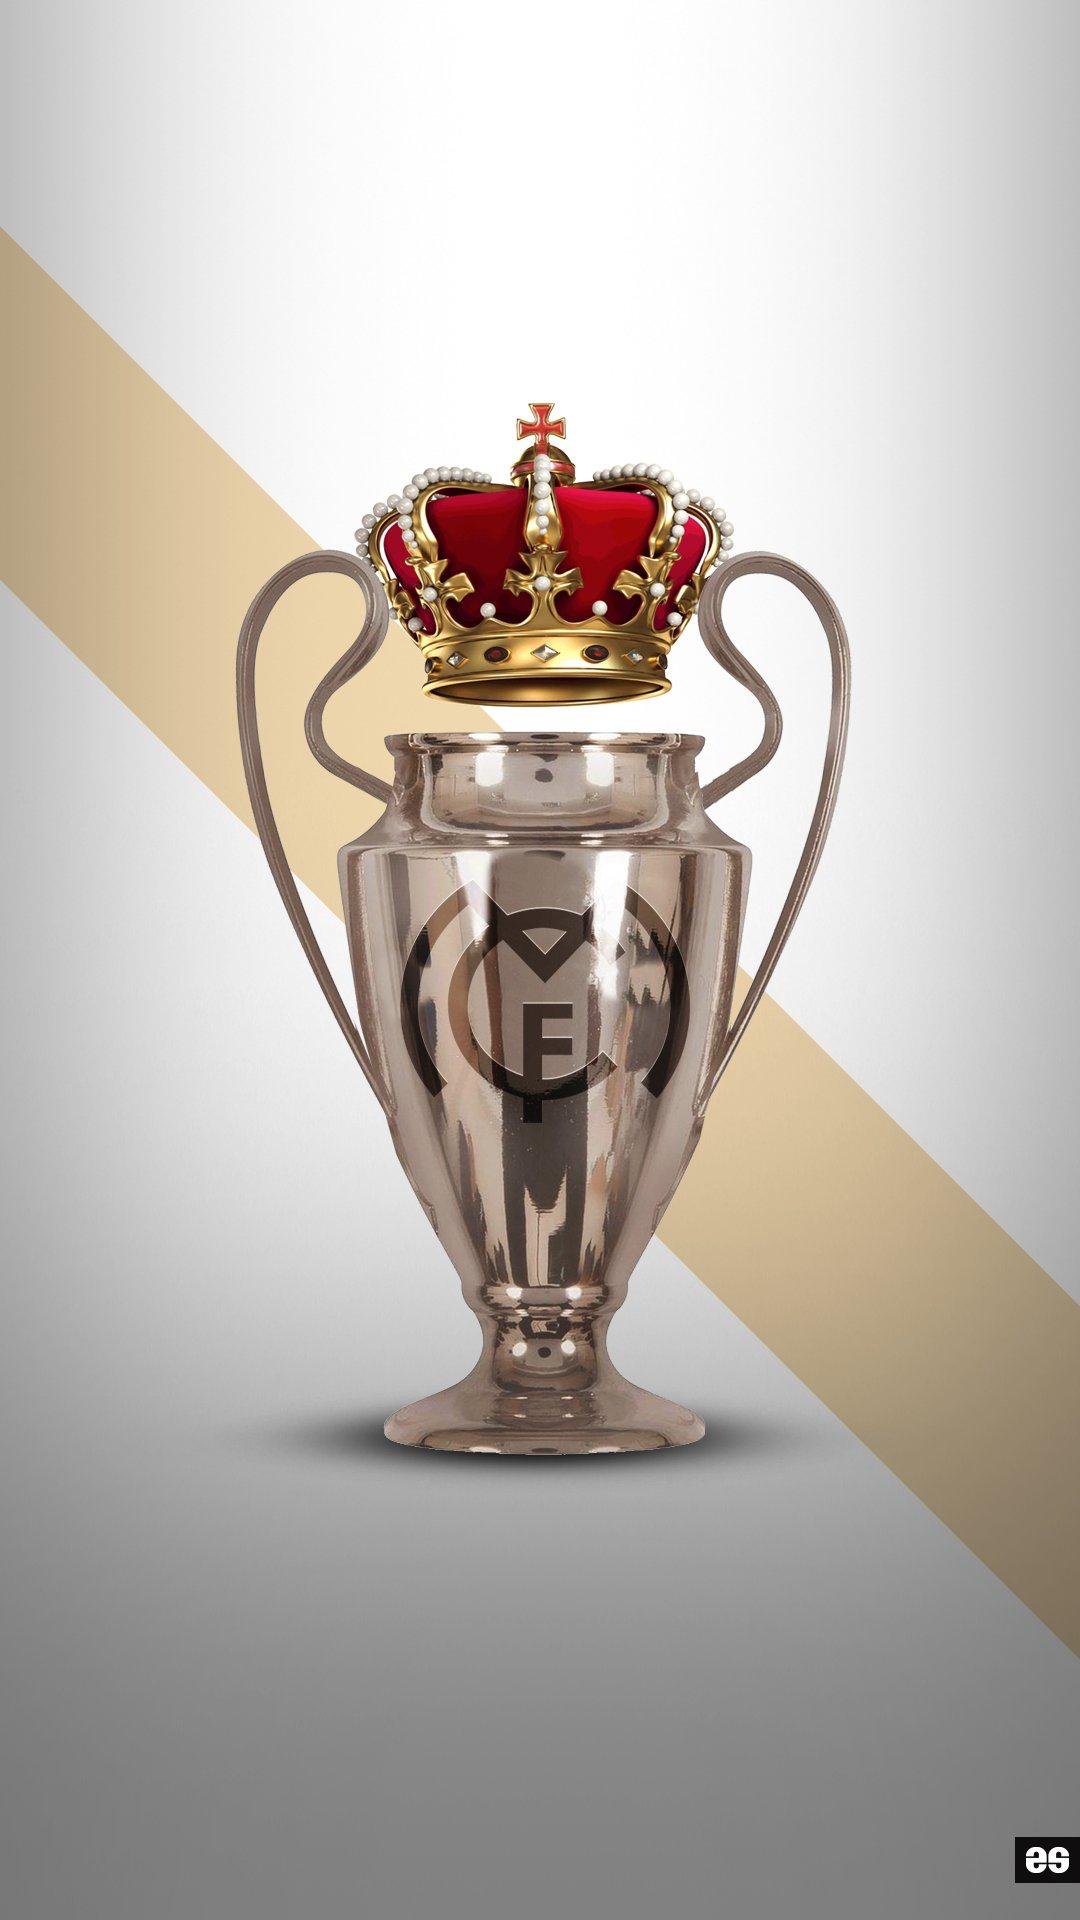 Wallpaper For Real Madrid 4K HD APK for Android Download